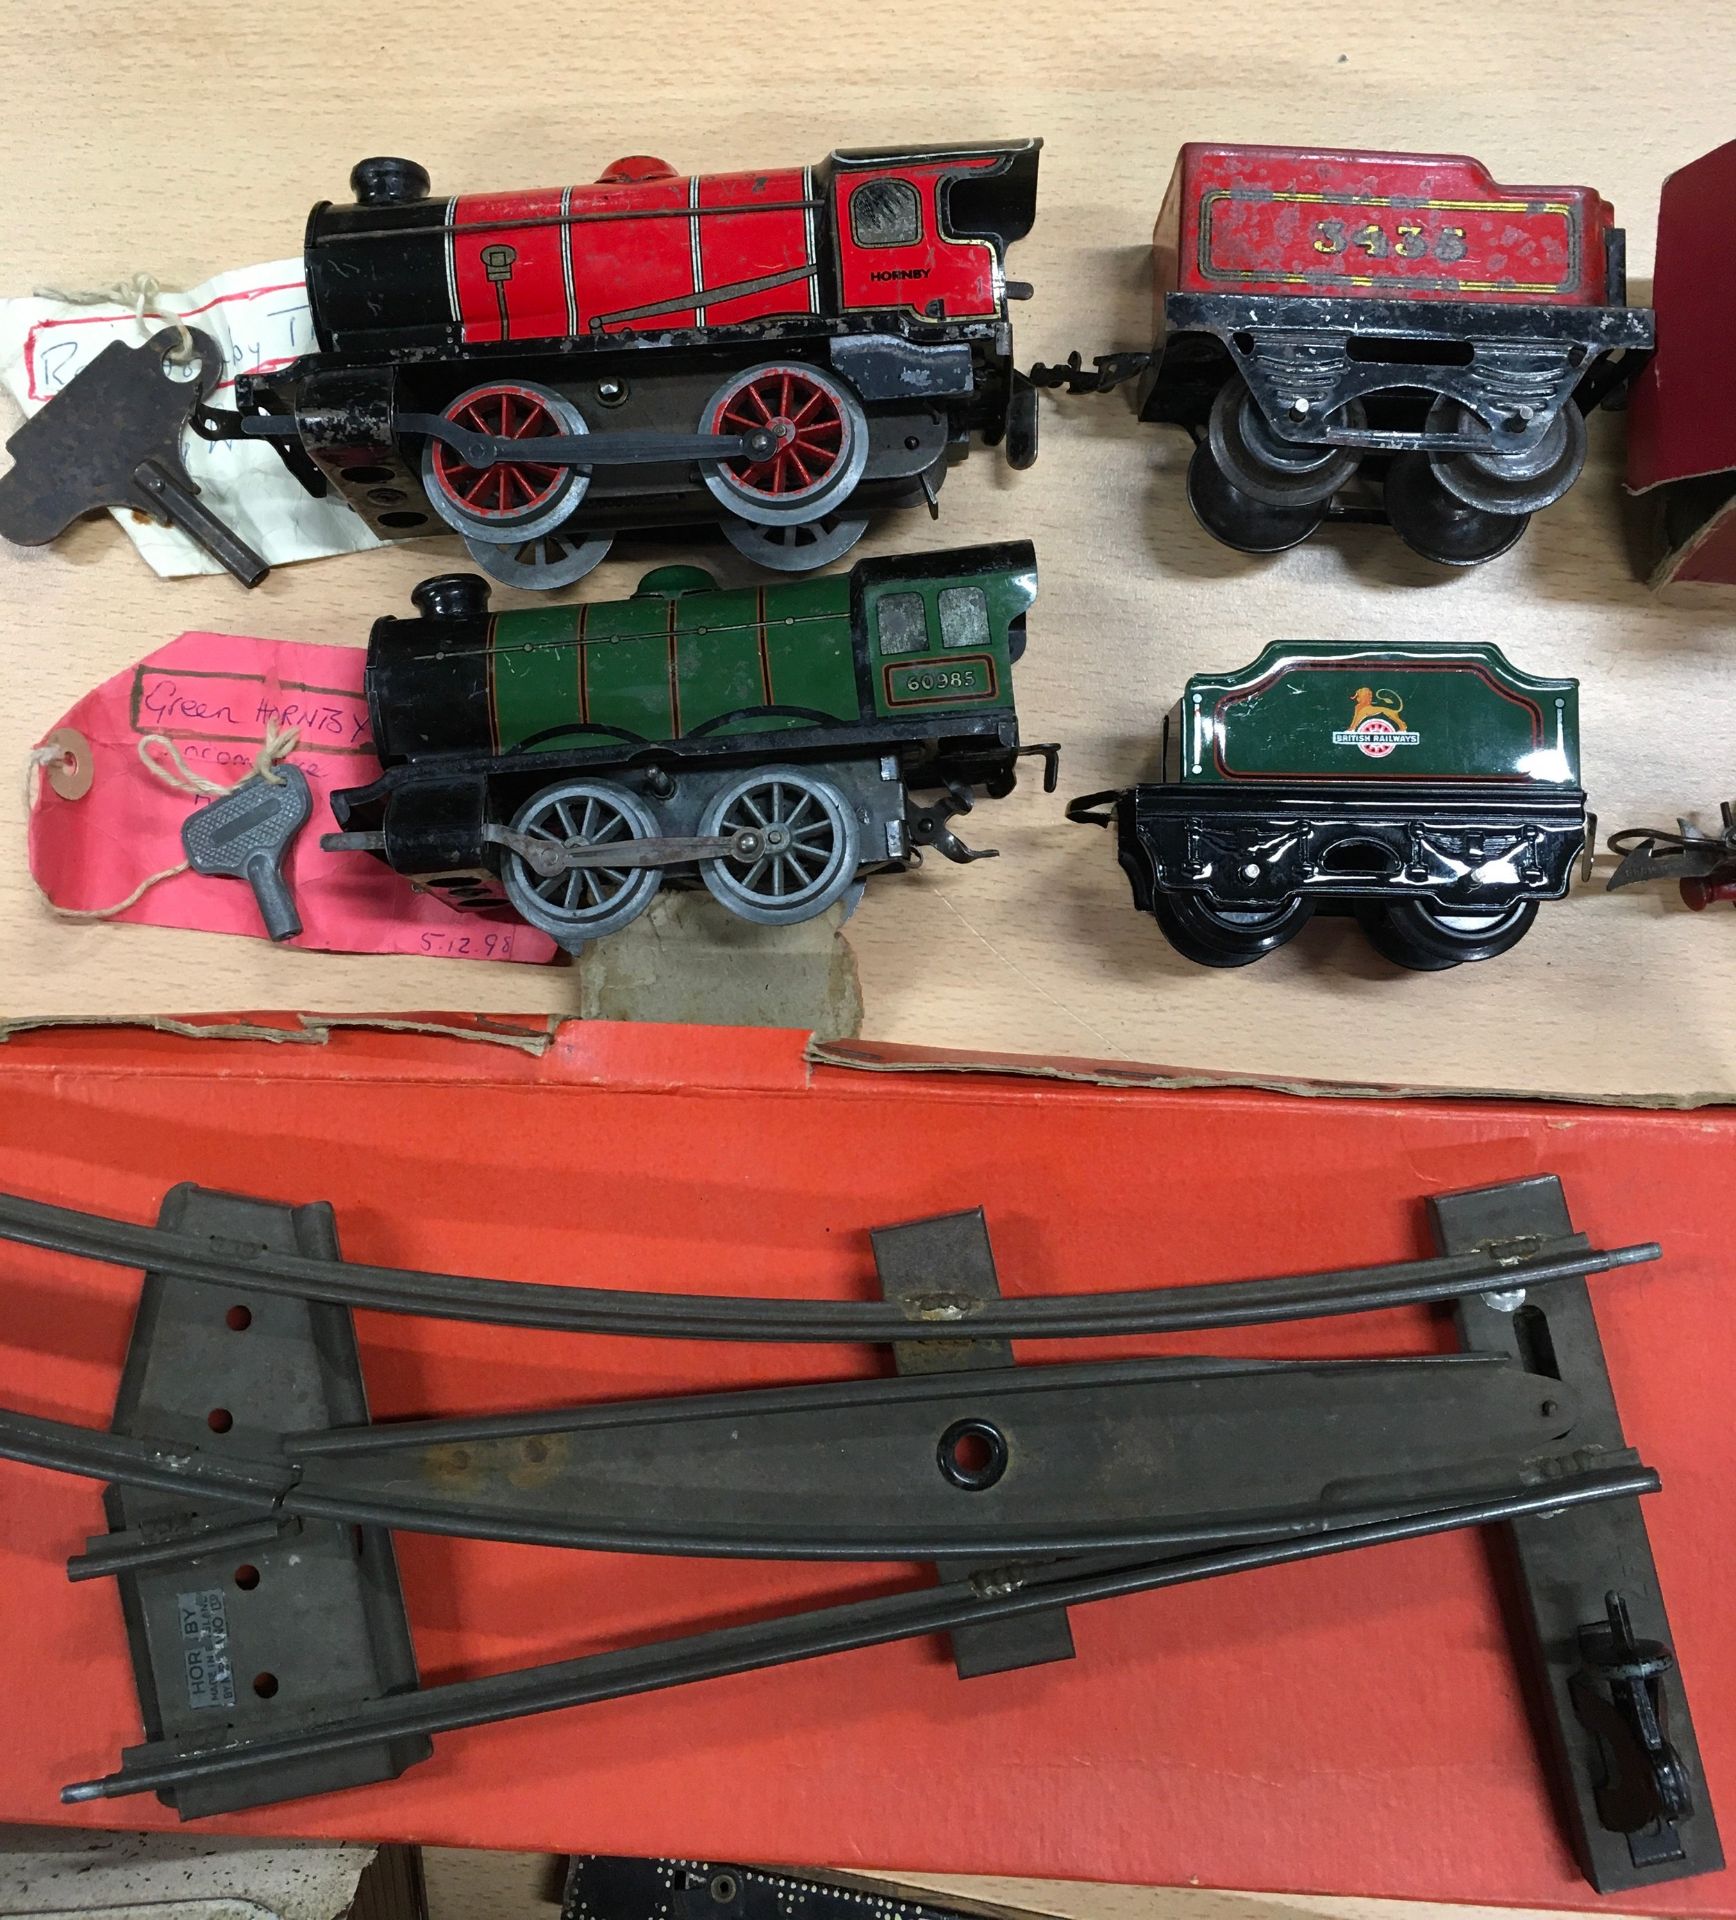 Hornby O Gauge group to include 2 0-4-0 locomotives #3435 and #60985 with keys, wagons, trucks, - Image 2 of 7